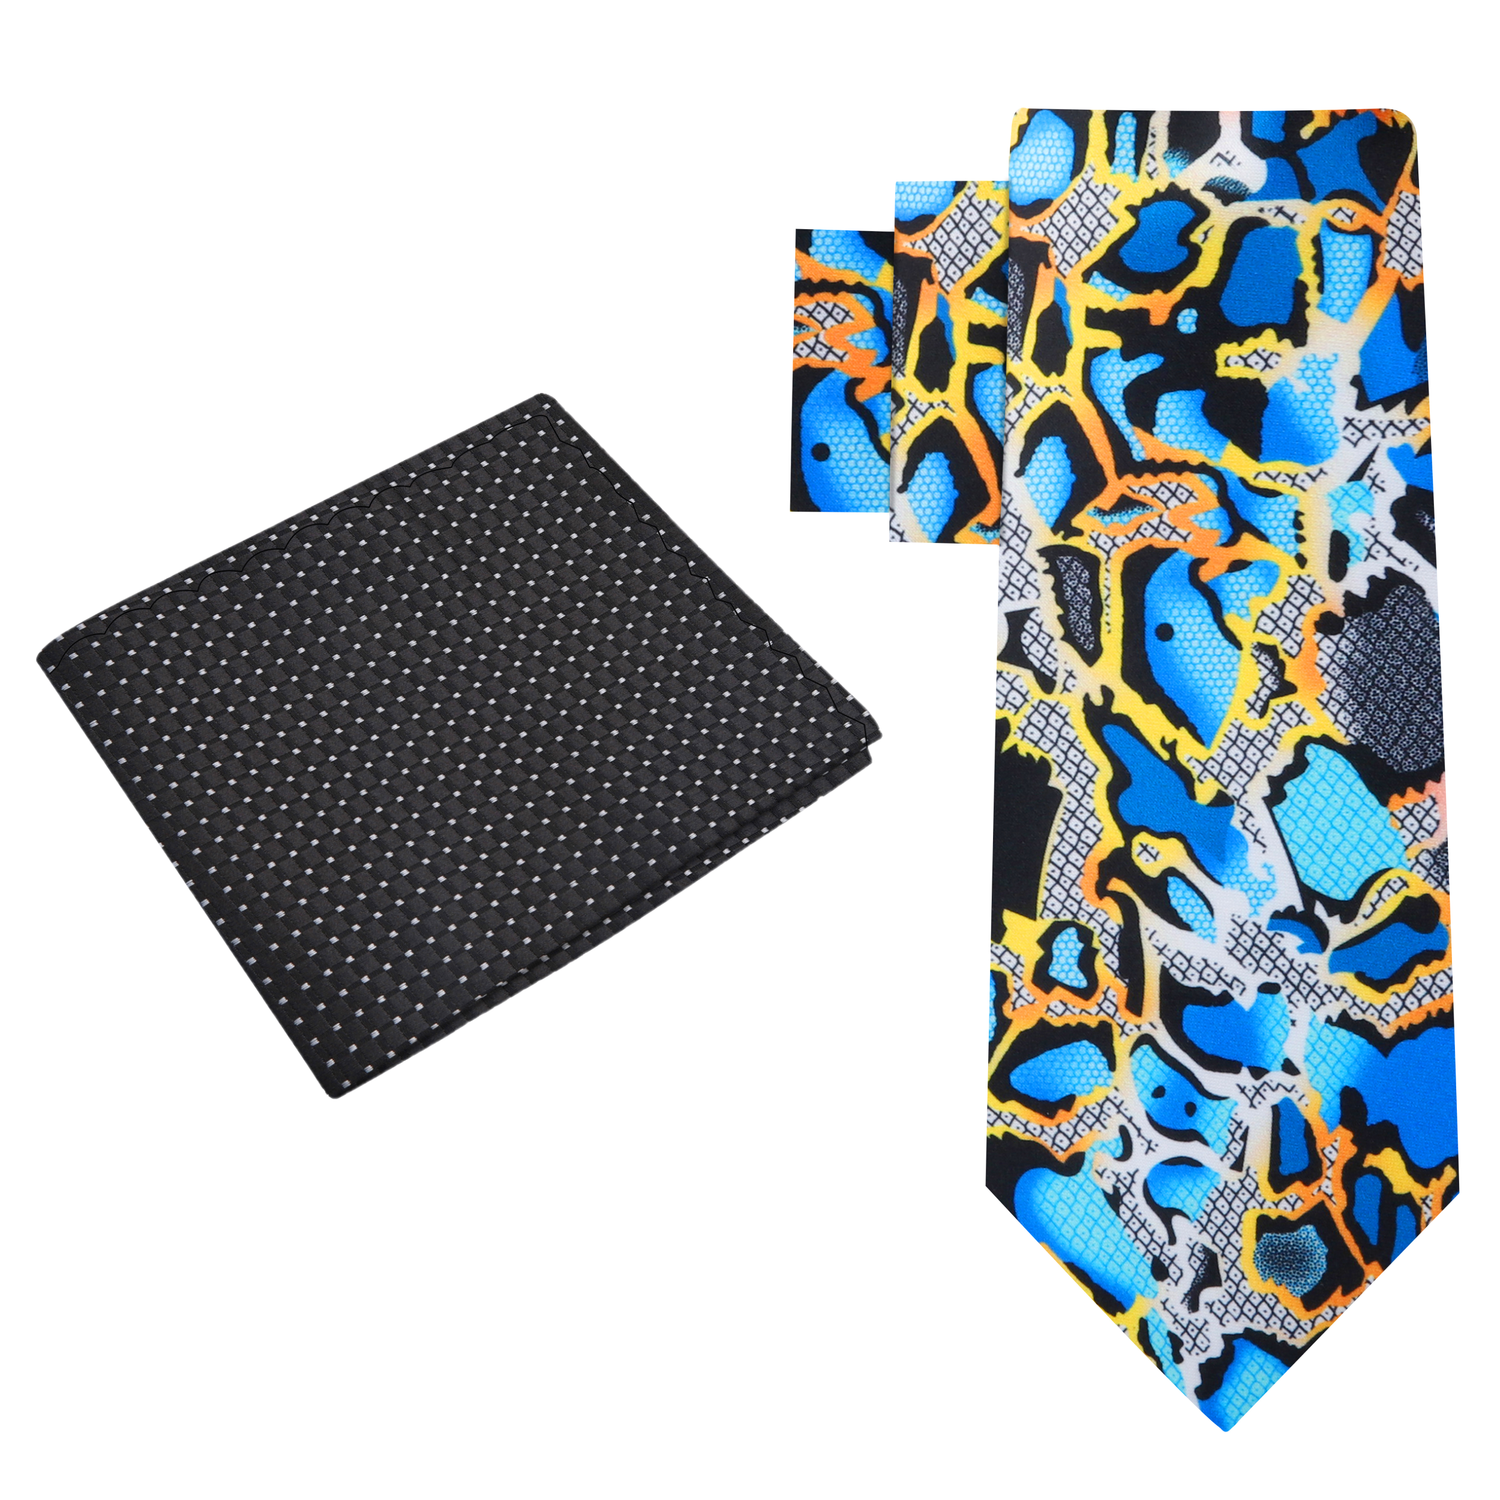 Alt View: Blue Gold Snakeskin Tie and Black Check Square